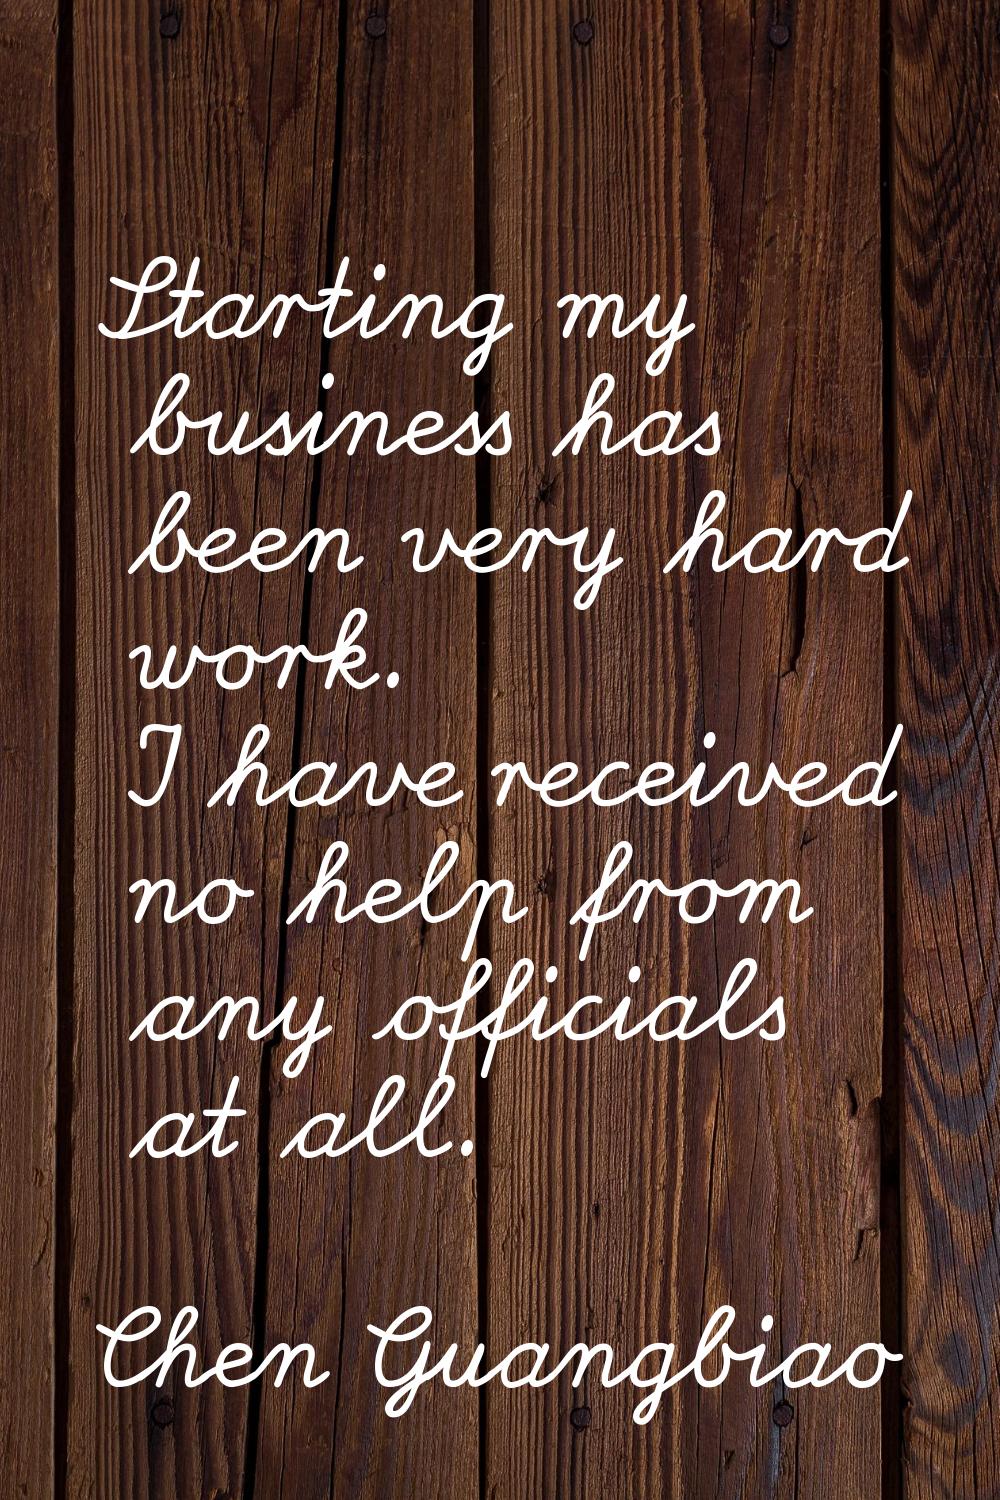 Starting my business has been very hard work. I have received no help from any officials at all.